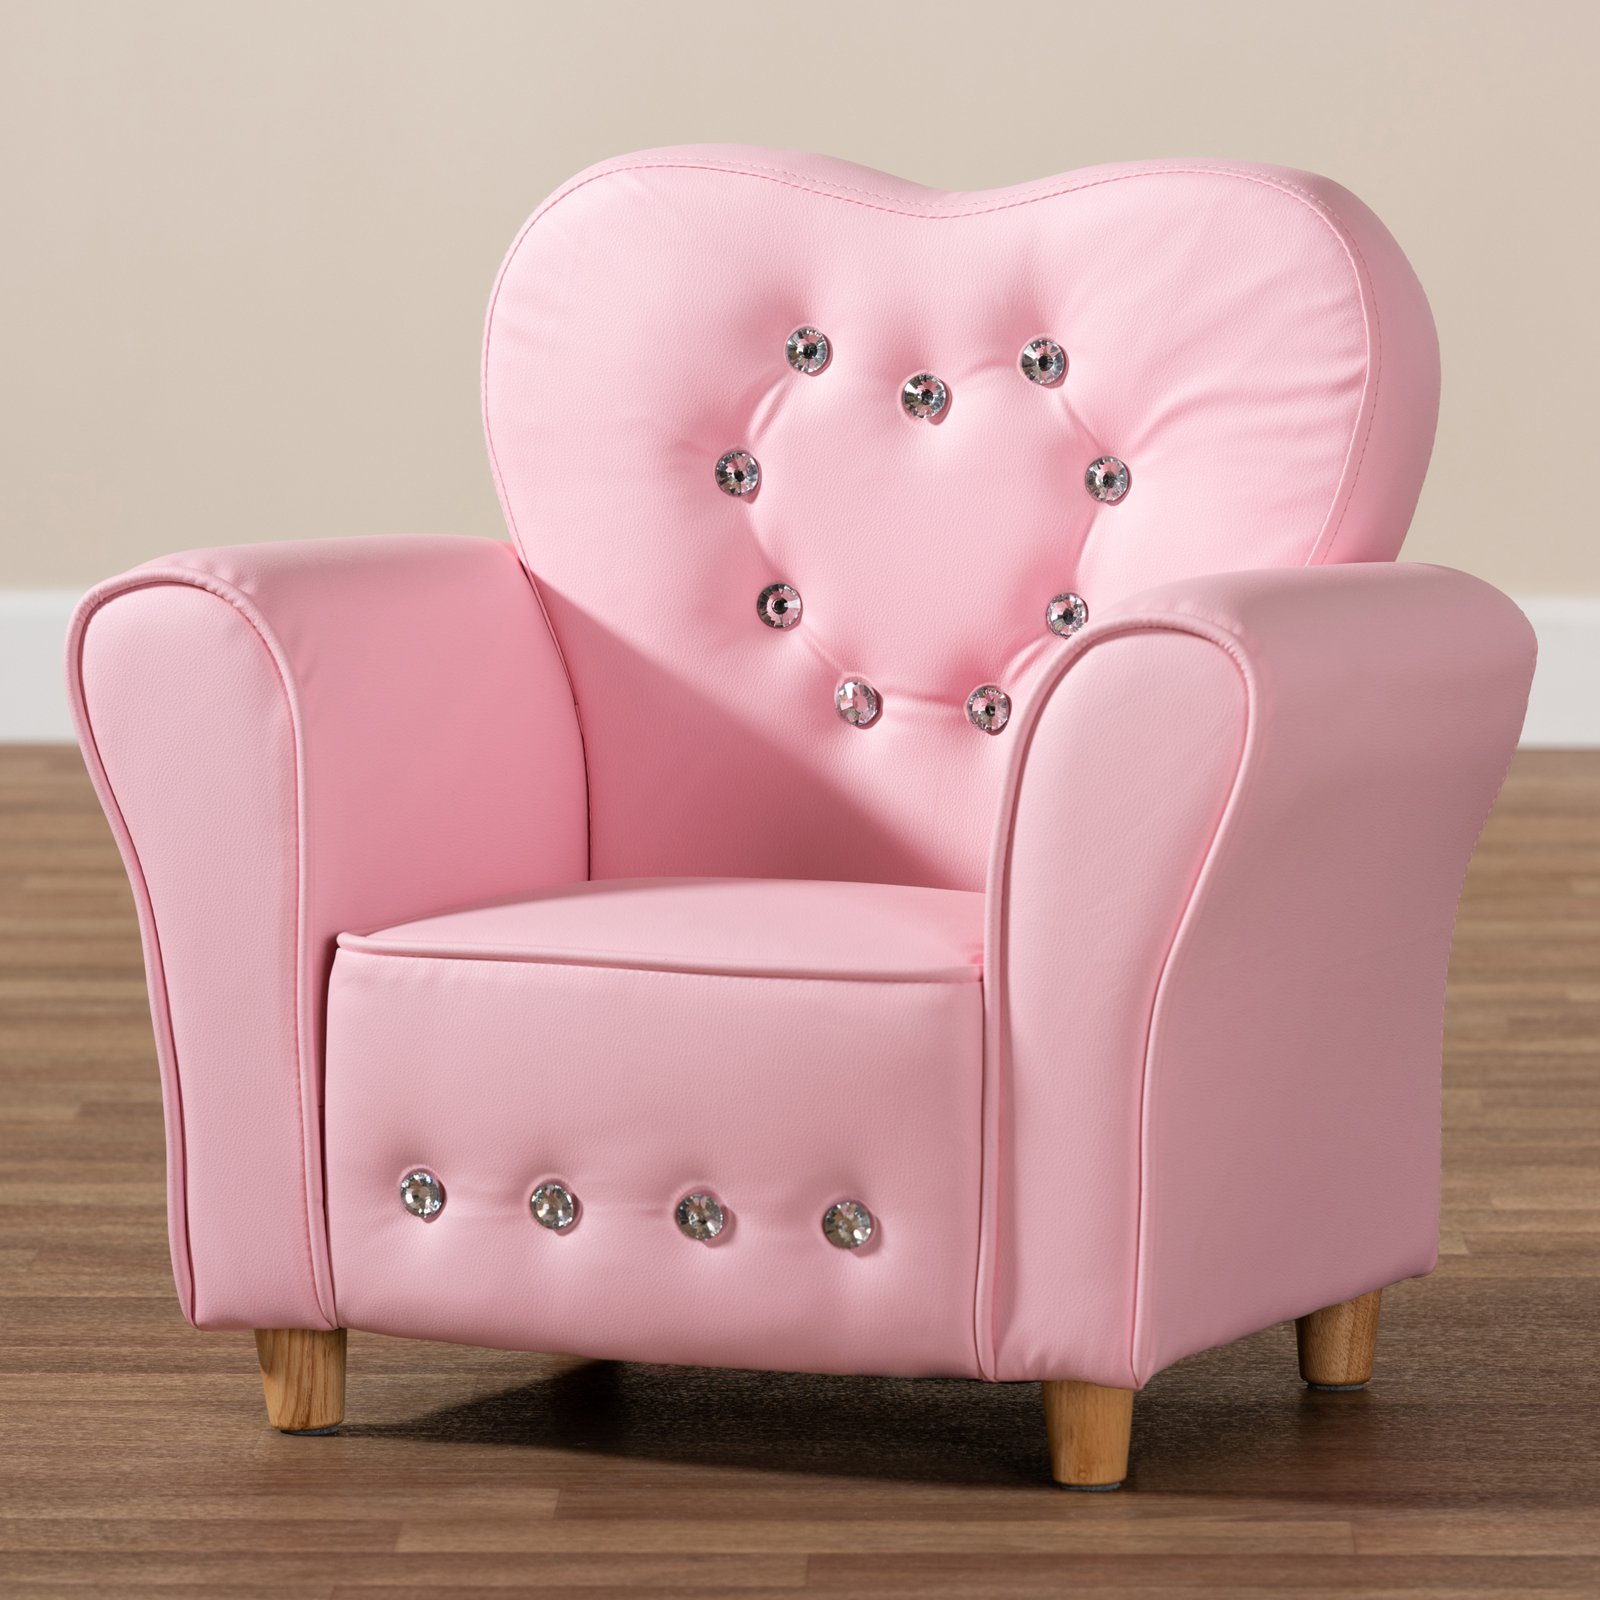 Baxton Studio Mabel Modern and Contemporary Pink Faux Leather Kids Armchair - image 2 of 8